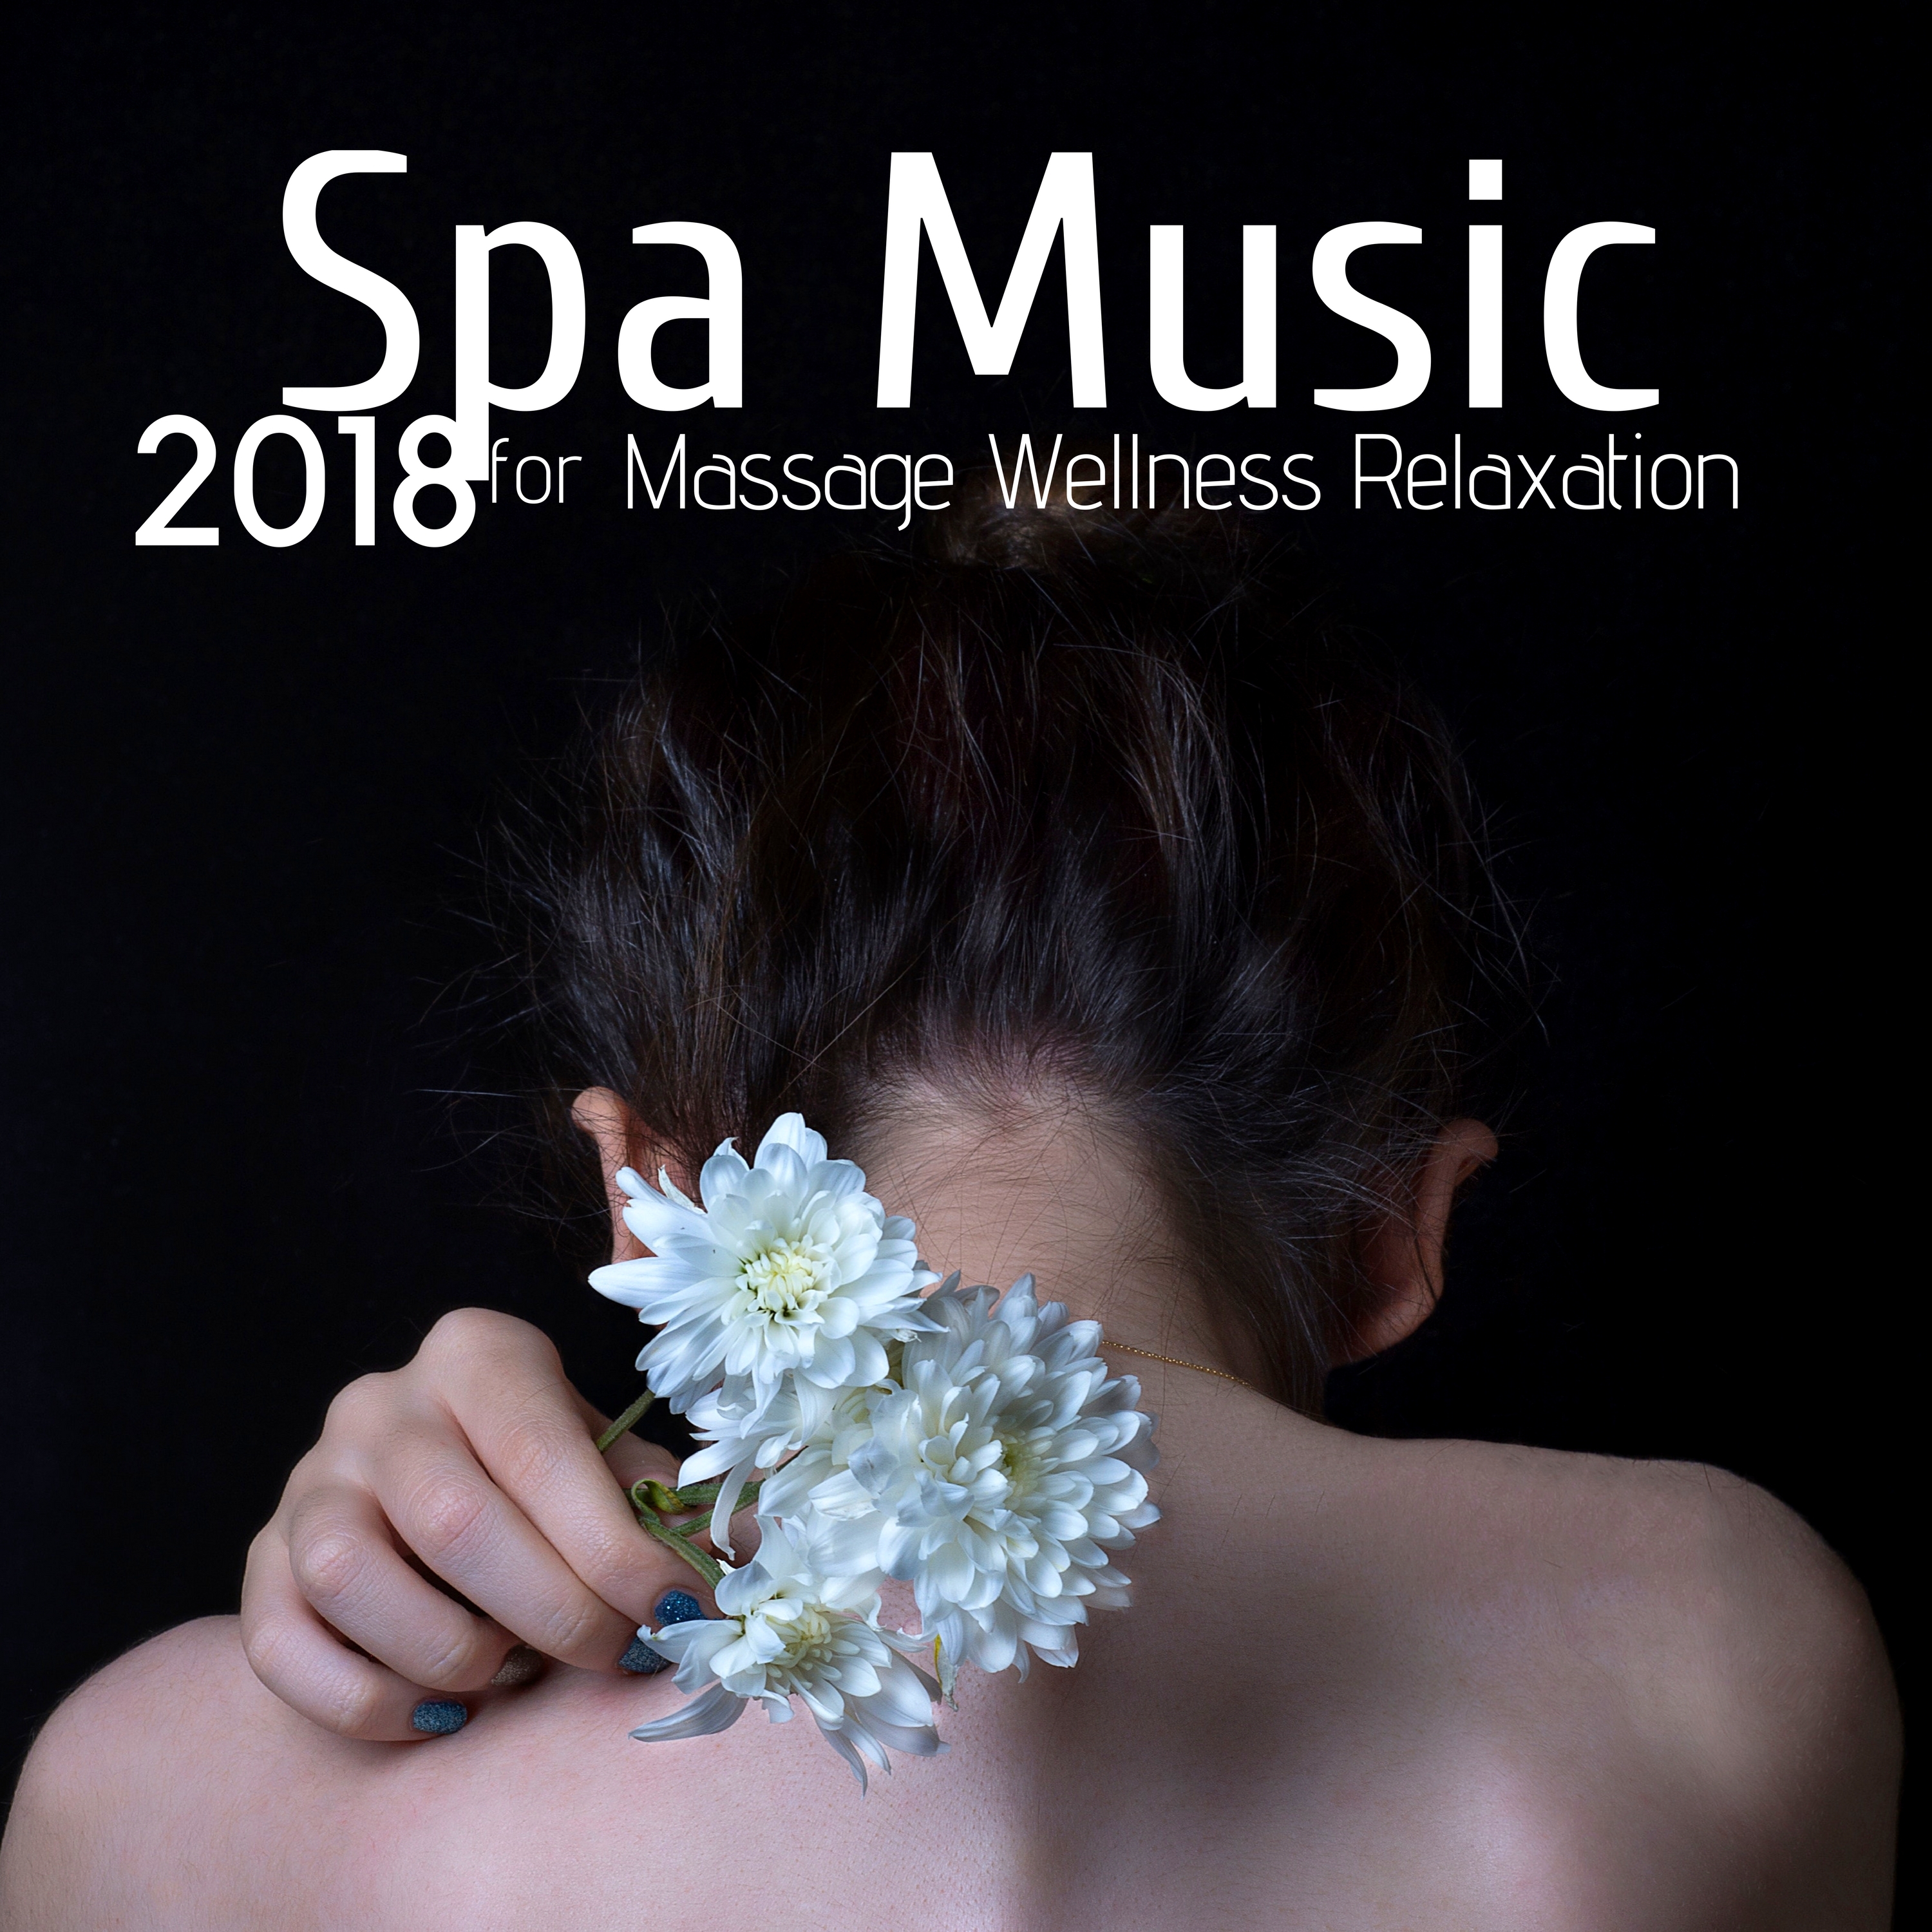 Spa Music for Massage Wellness Relaxation 2018